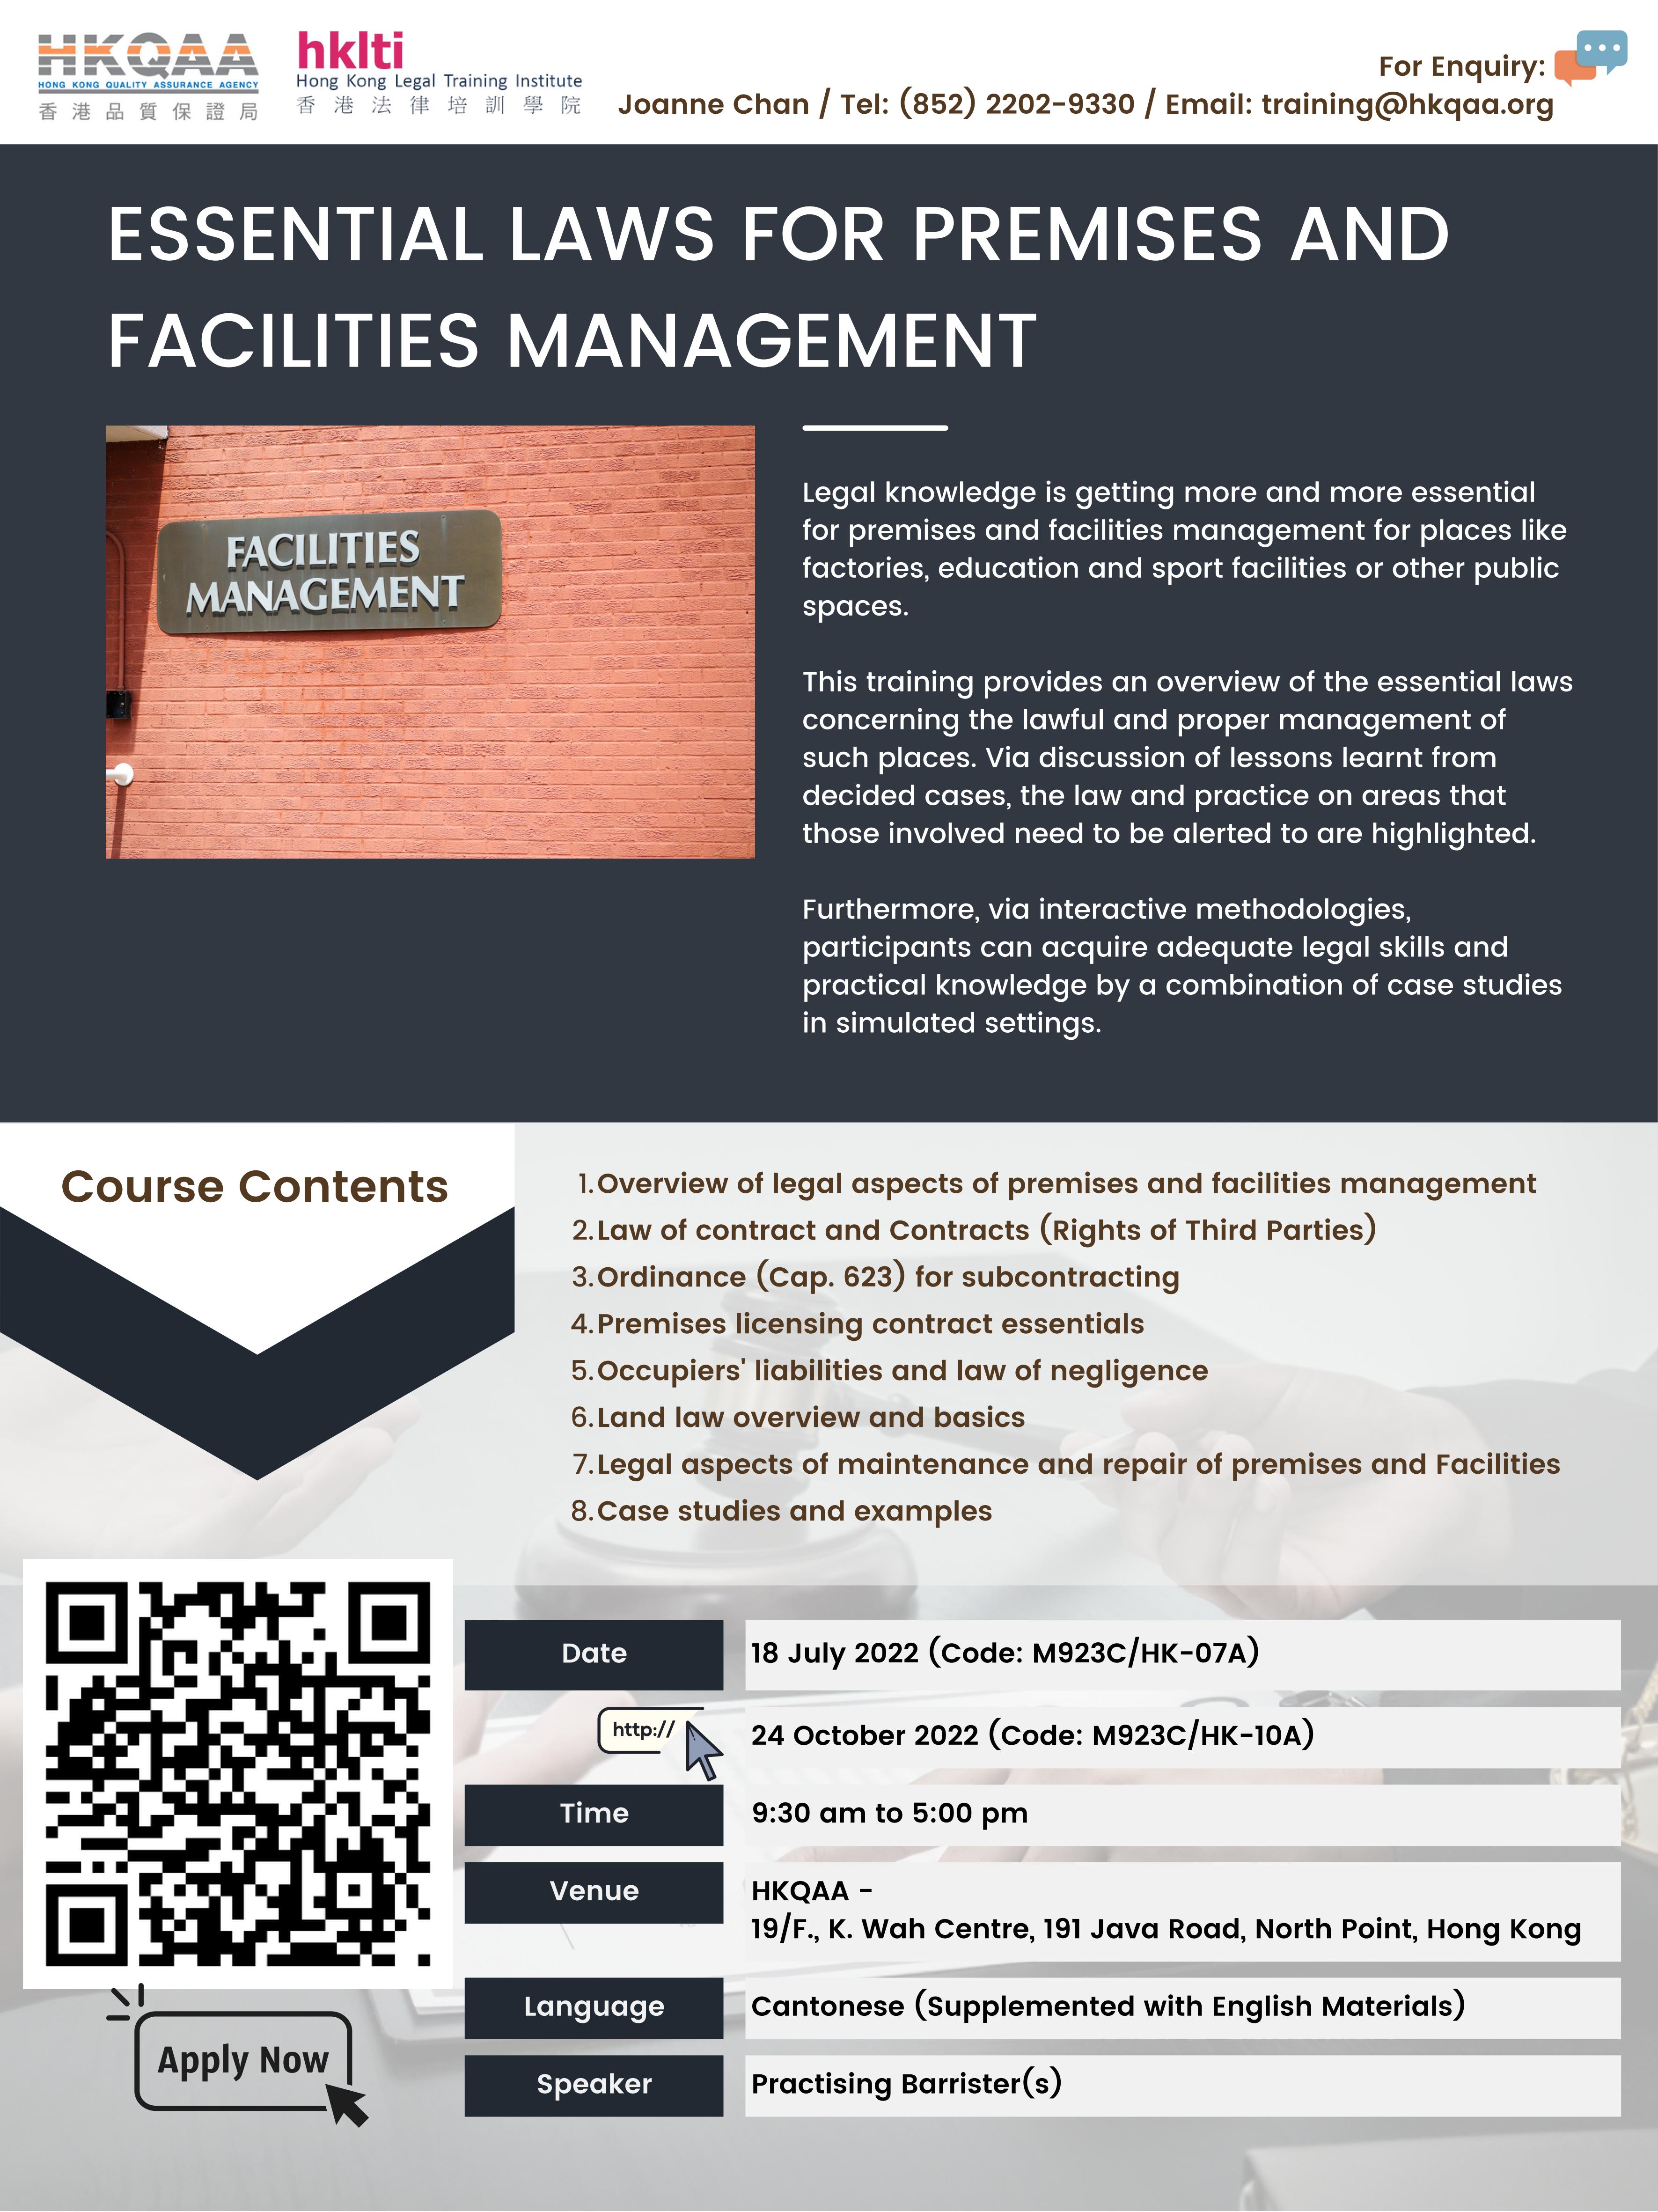 Essential Laws for Premises and Facilities Management